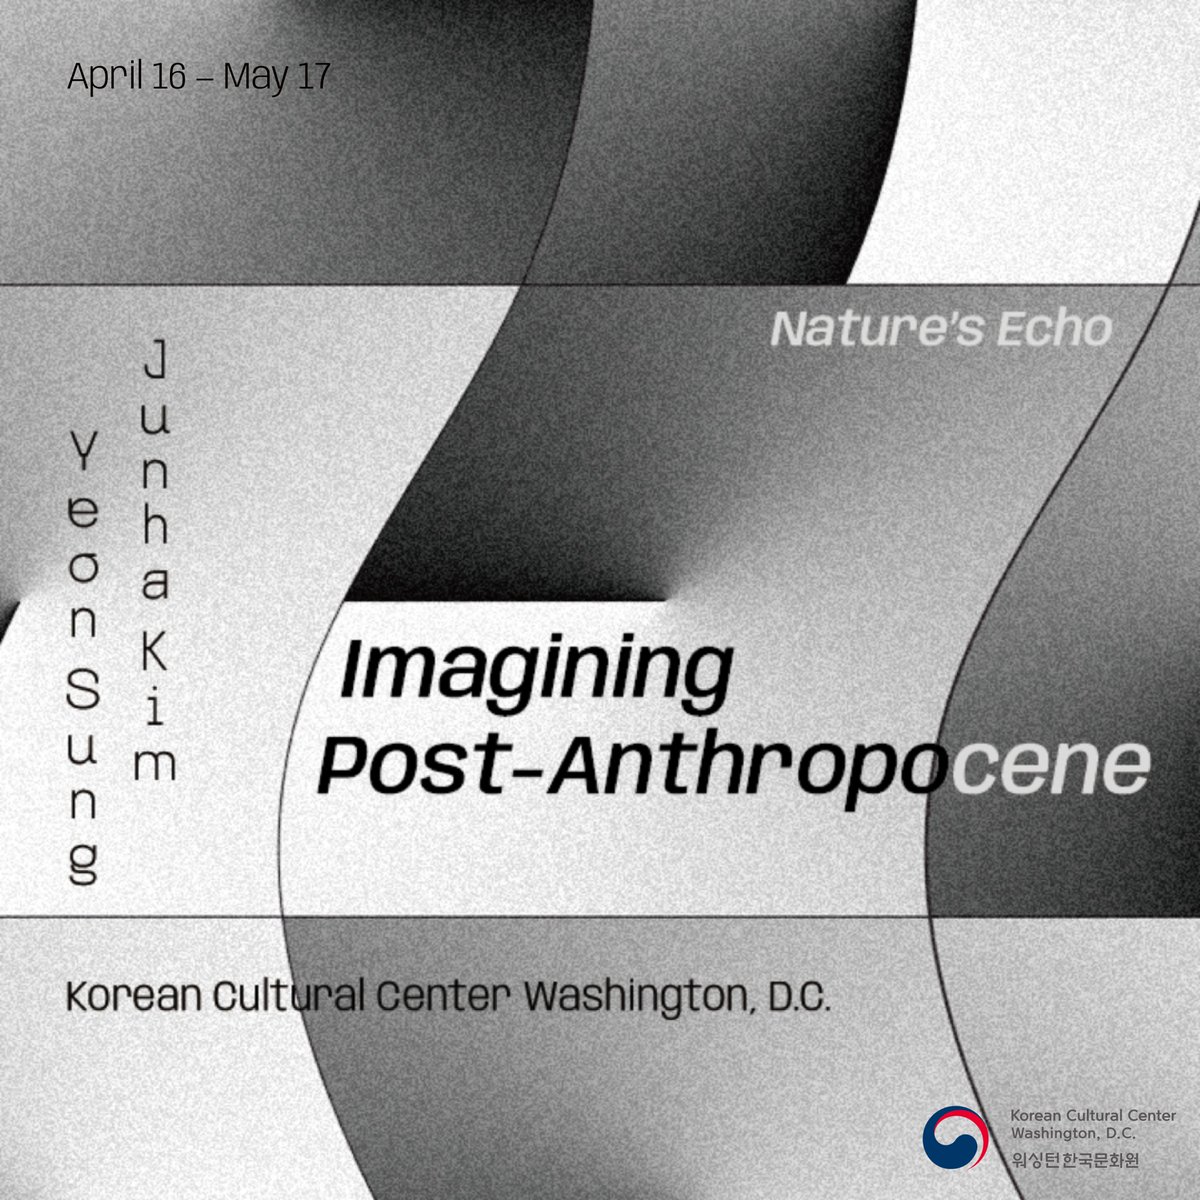 We're excited to bring you 'Imagining Post-Anthropocene,' the second installment of the exhibition series 'Nature's Echo'! 🌏🤖 📅 Exhibition Period: April 16 - May 17 📍 Location: Korean Cultural Center Washington D.C. 🗳No RSVP required For more info: washingtondc.korean-culture.org/en/1126/board/…